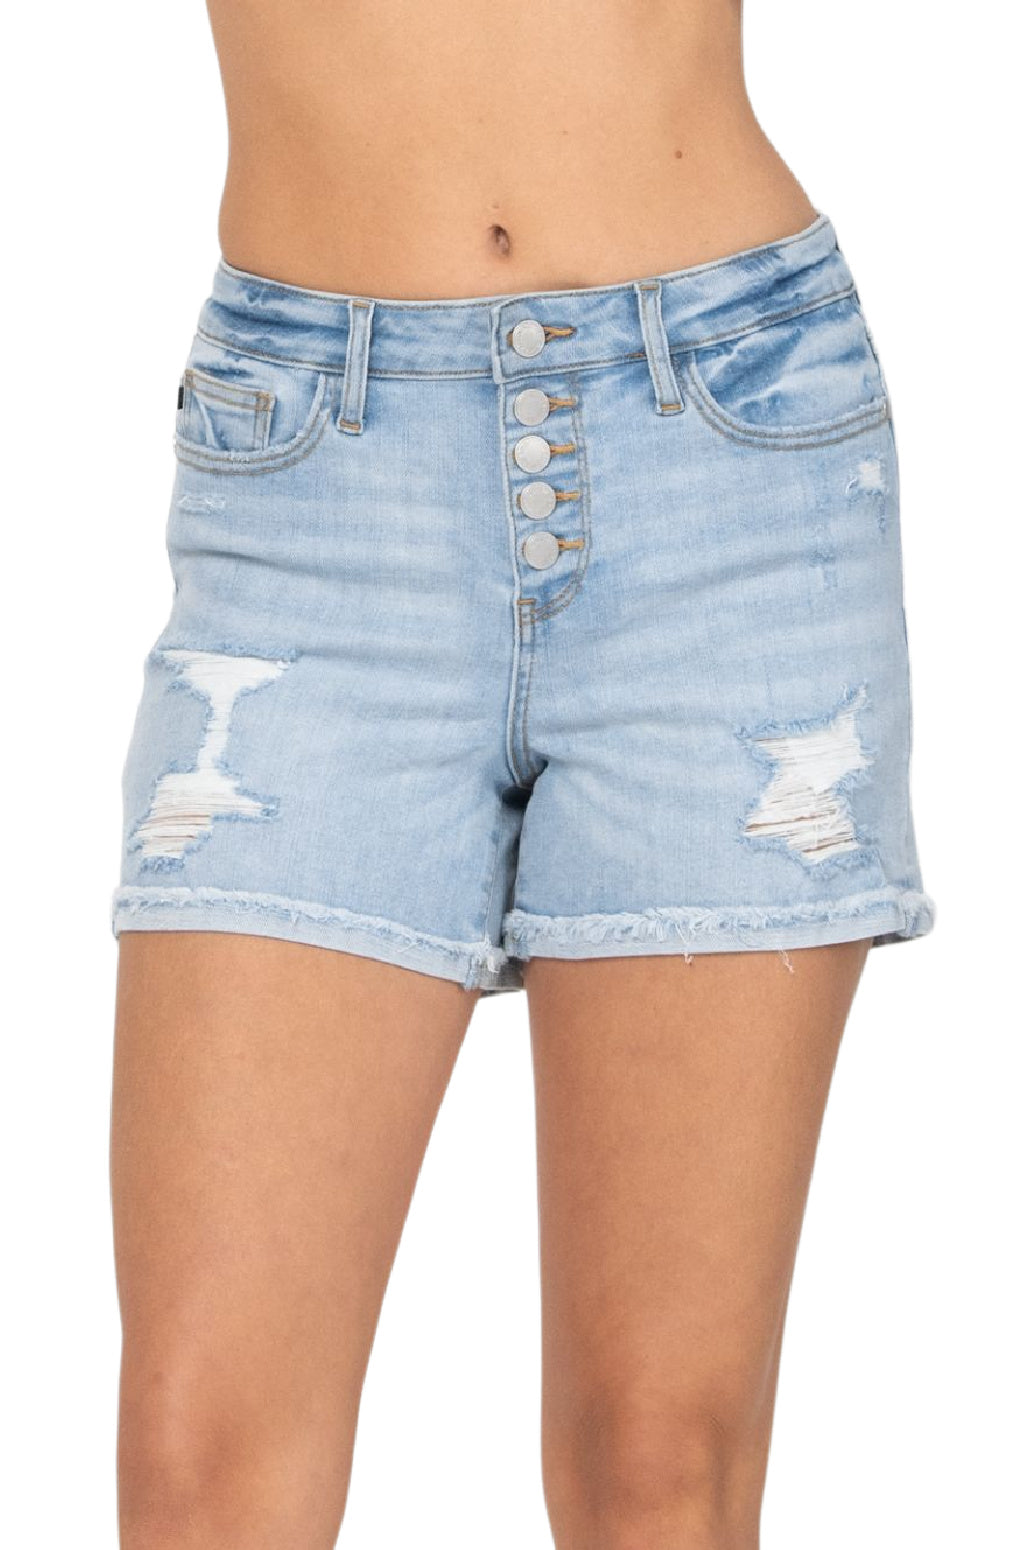 Judy Blue Cuffed Button Fly Destroyed High Waist Shorts Style 150033